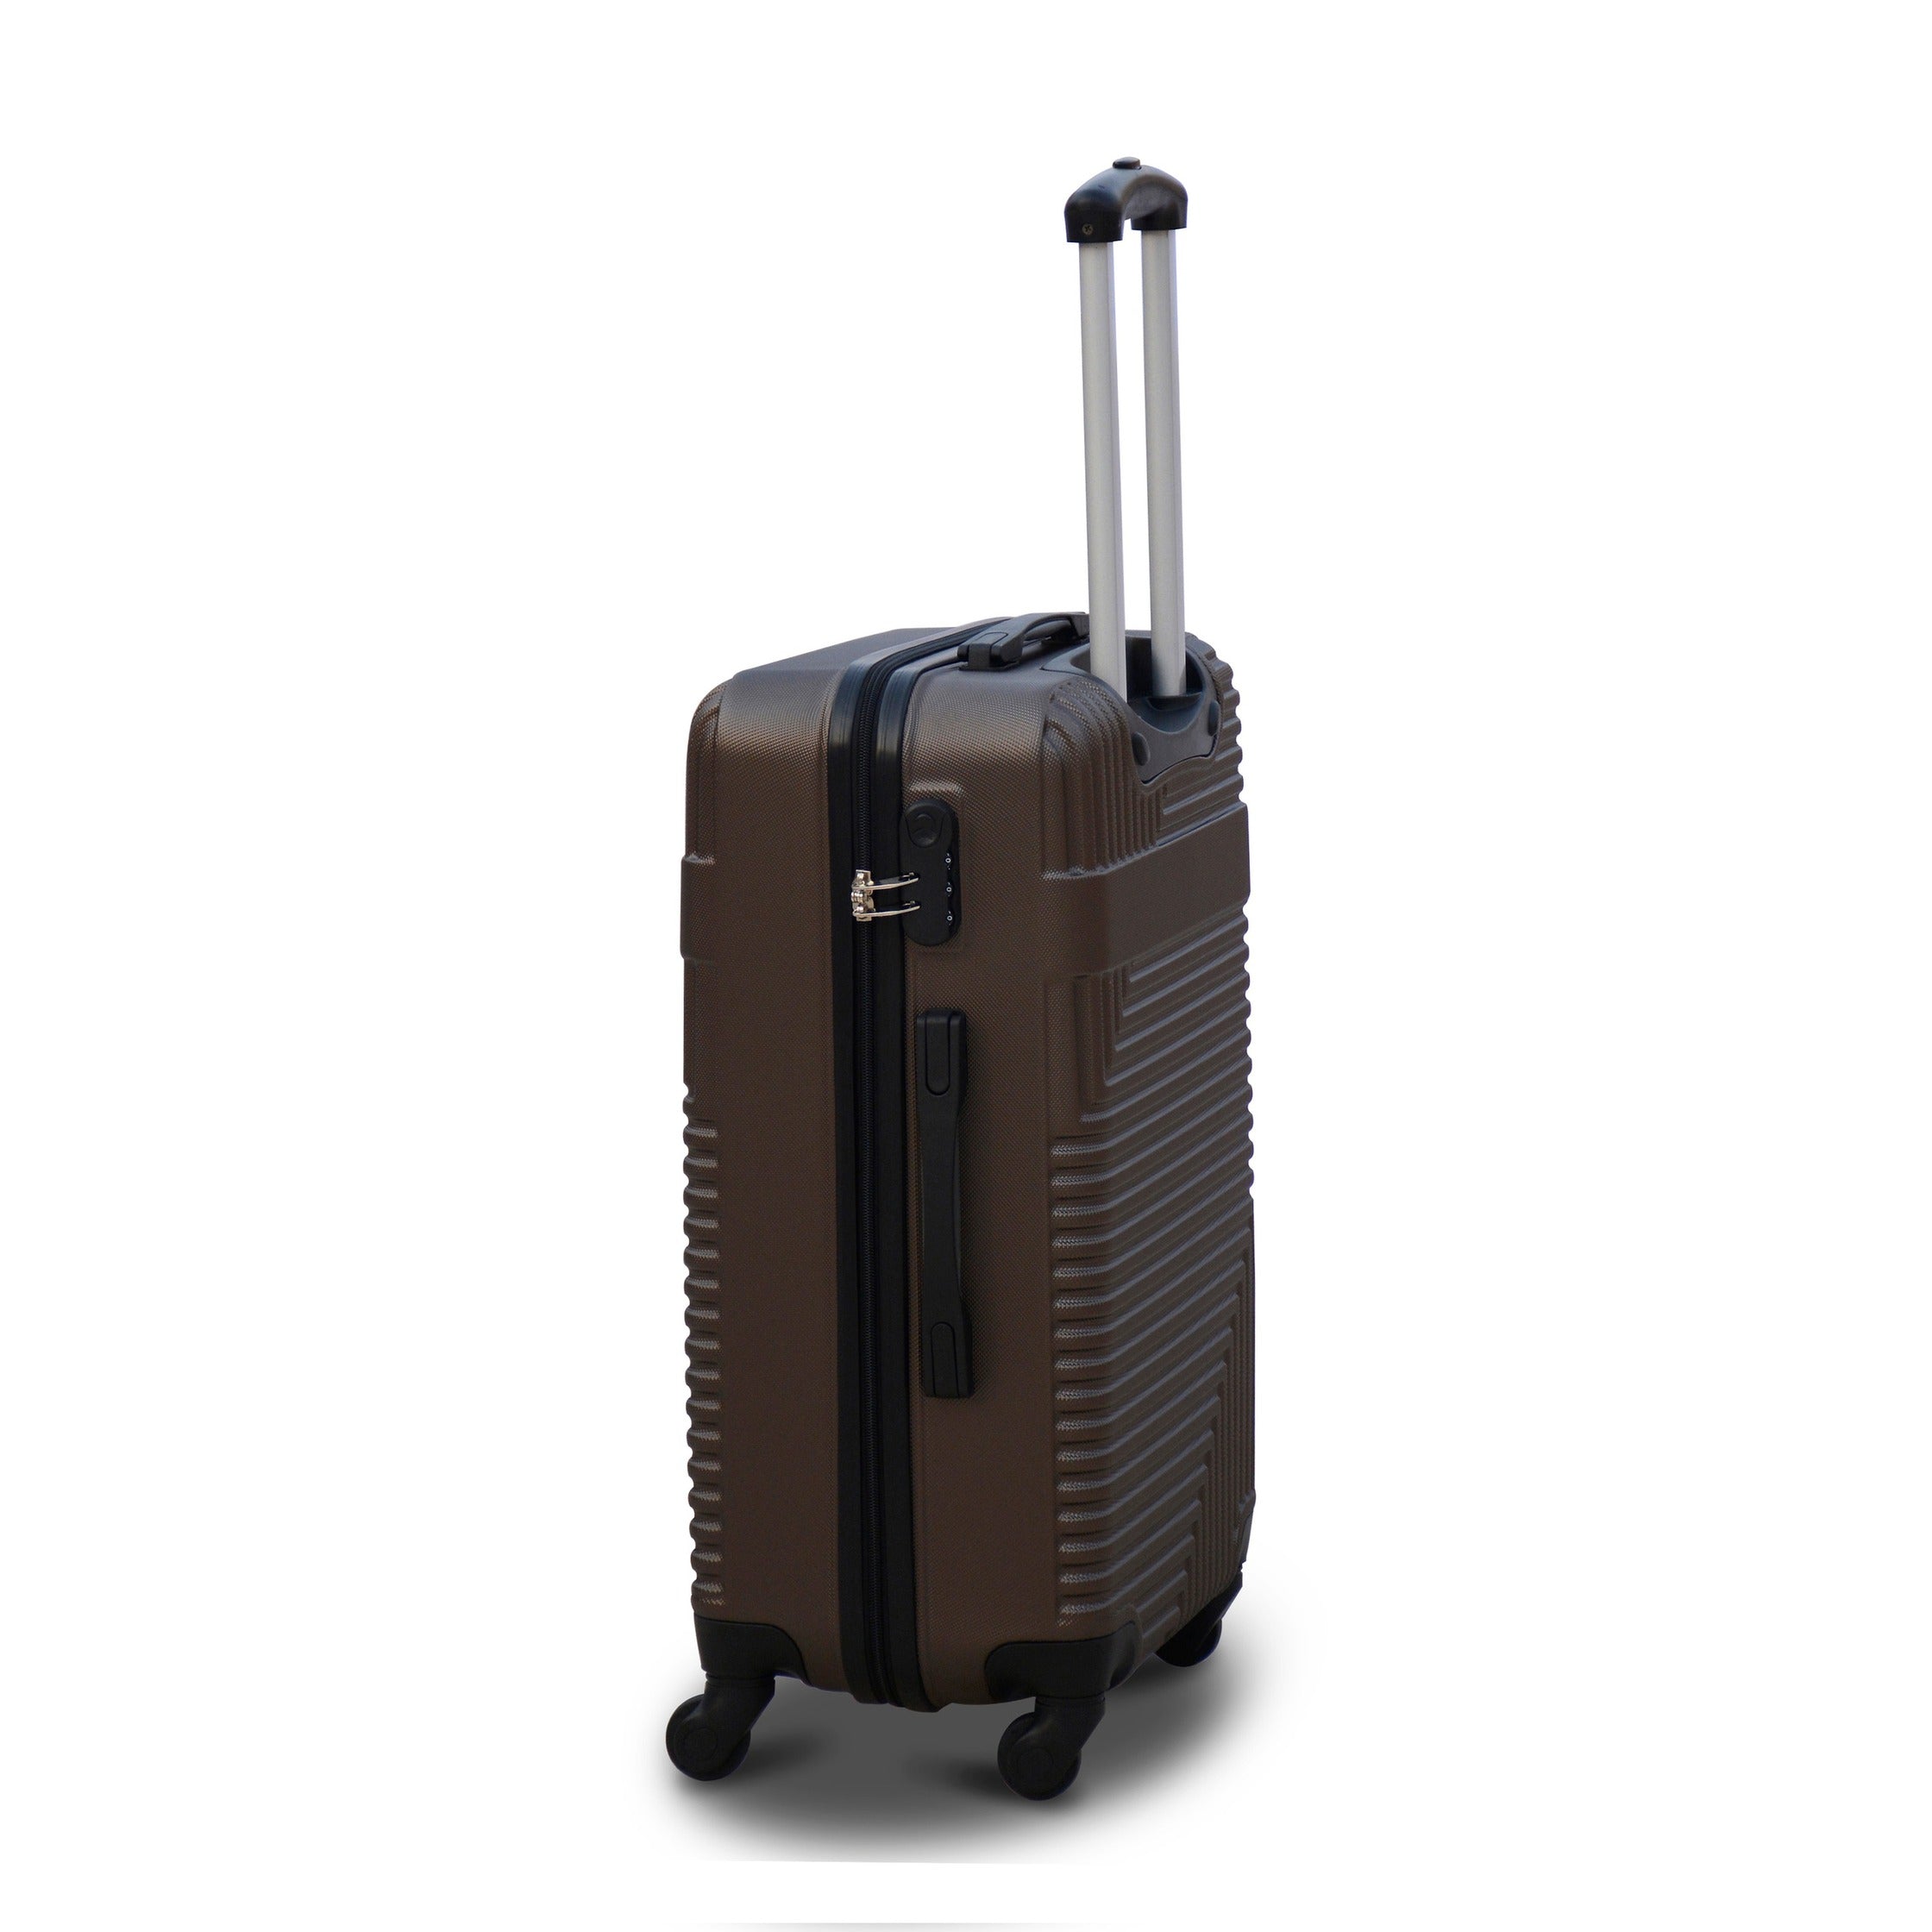 28" Brown Colour Travel Way ABS Luggage Lightweight Hard Case Spinner Wheel Trolley Bag